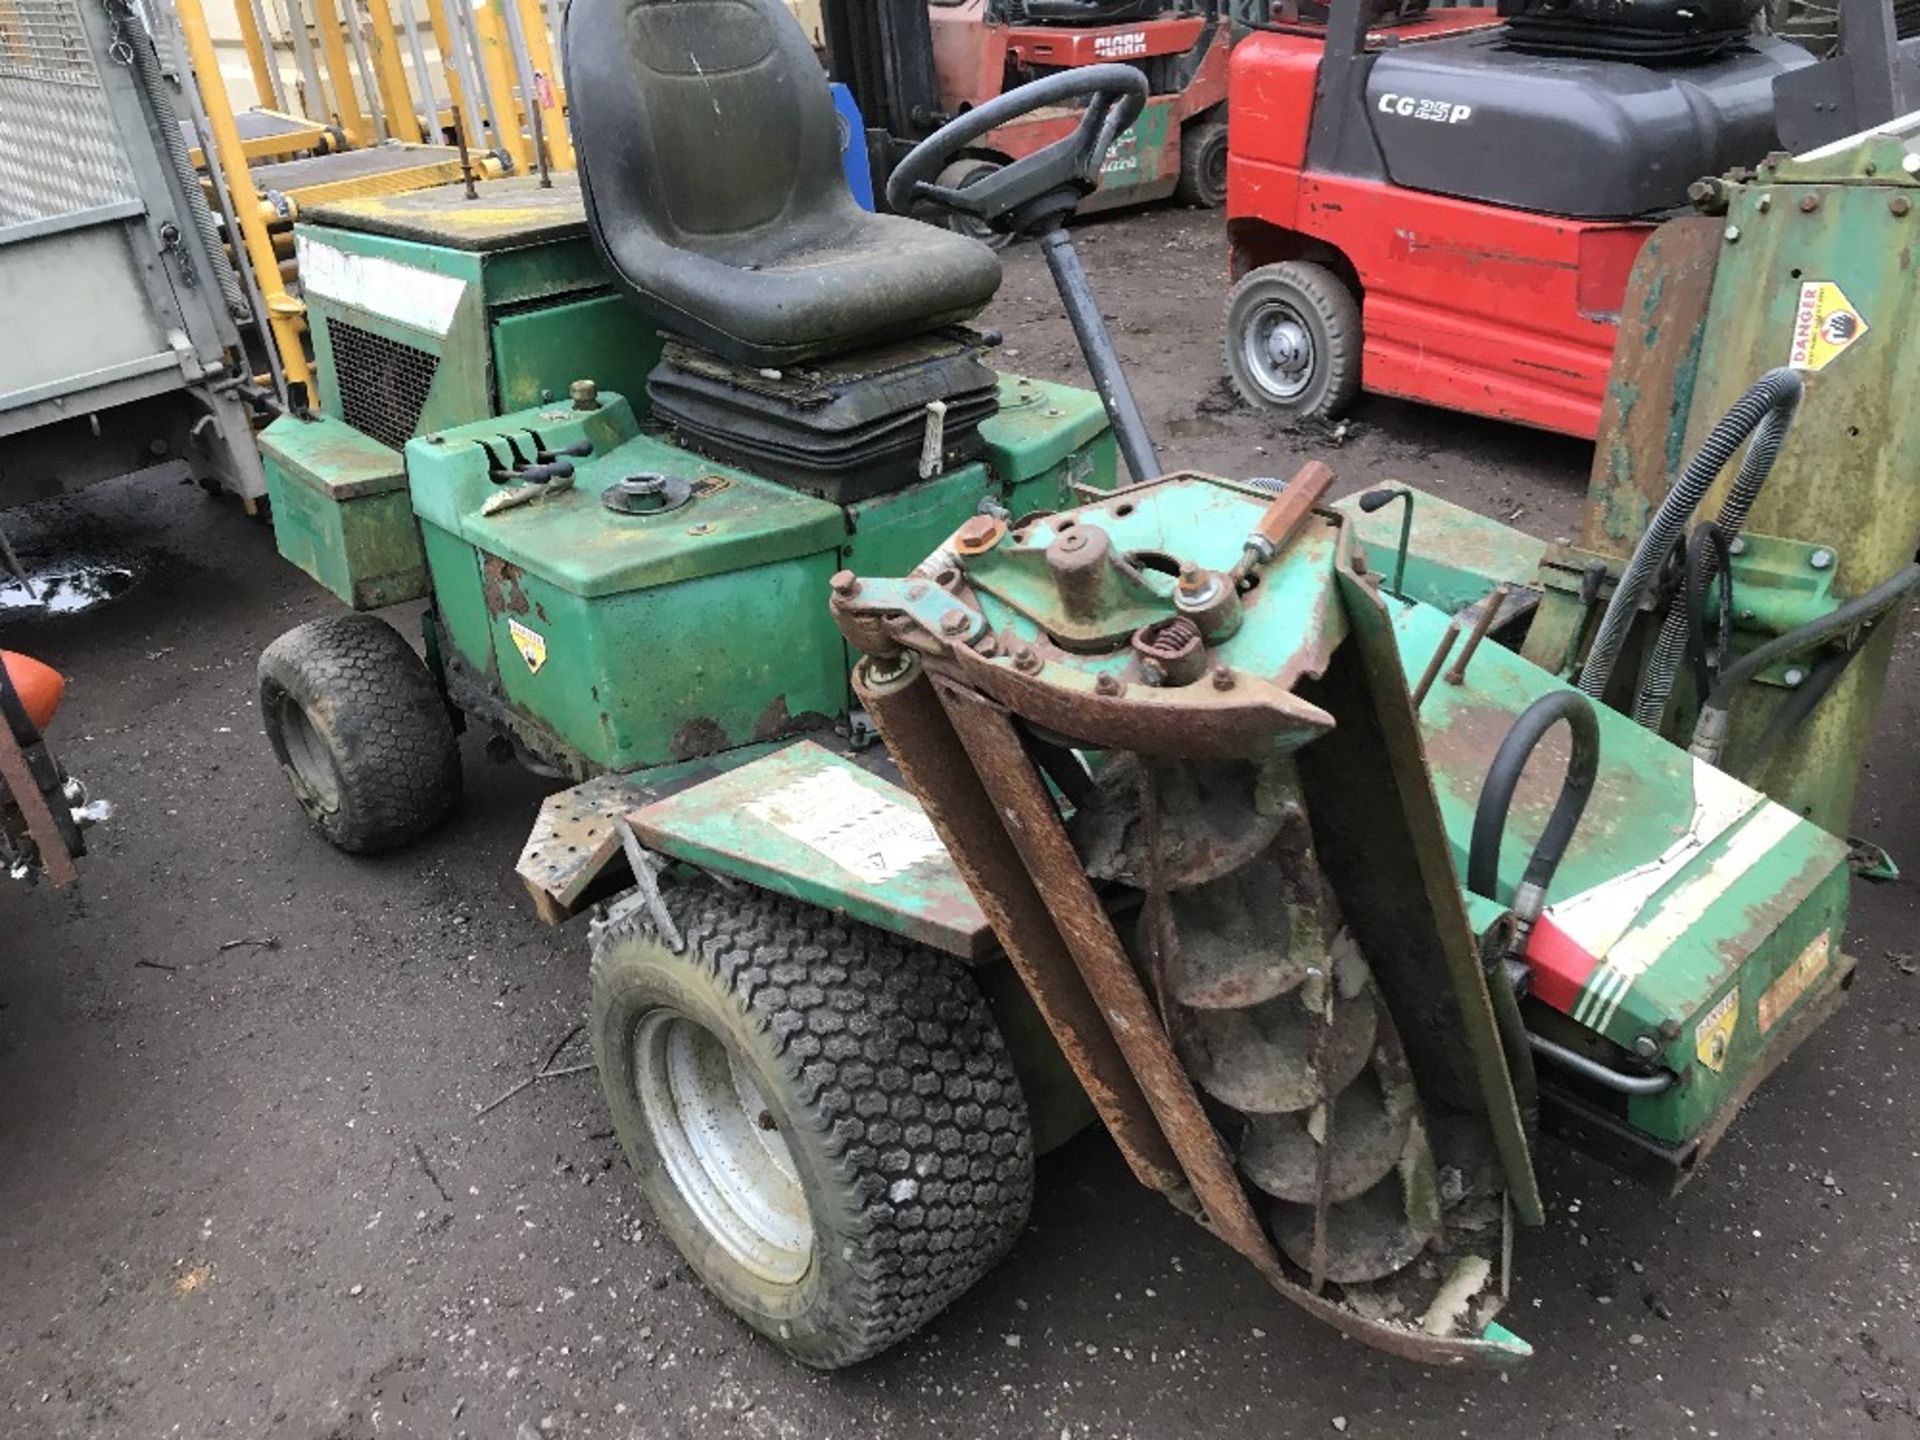 RANSOMES 213 FOR SPARES, KUBOTA DIESEL ENGINE, SOME PARTS MISSING